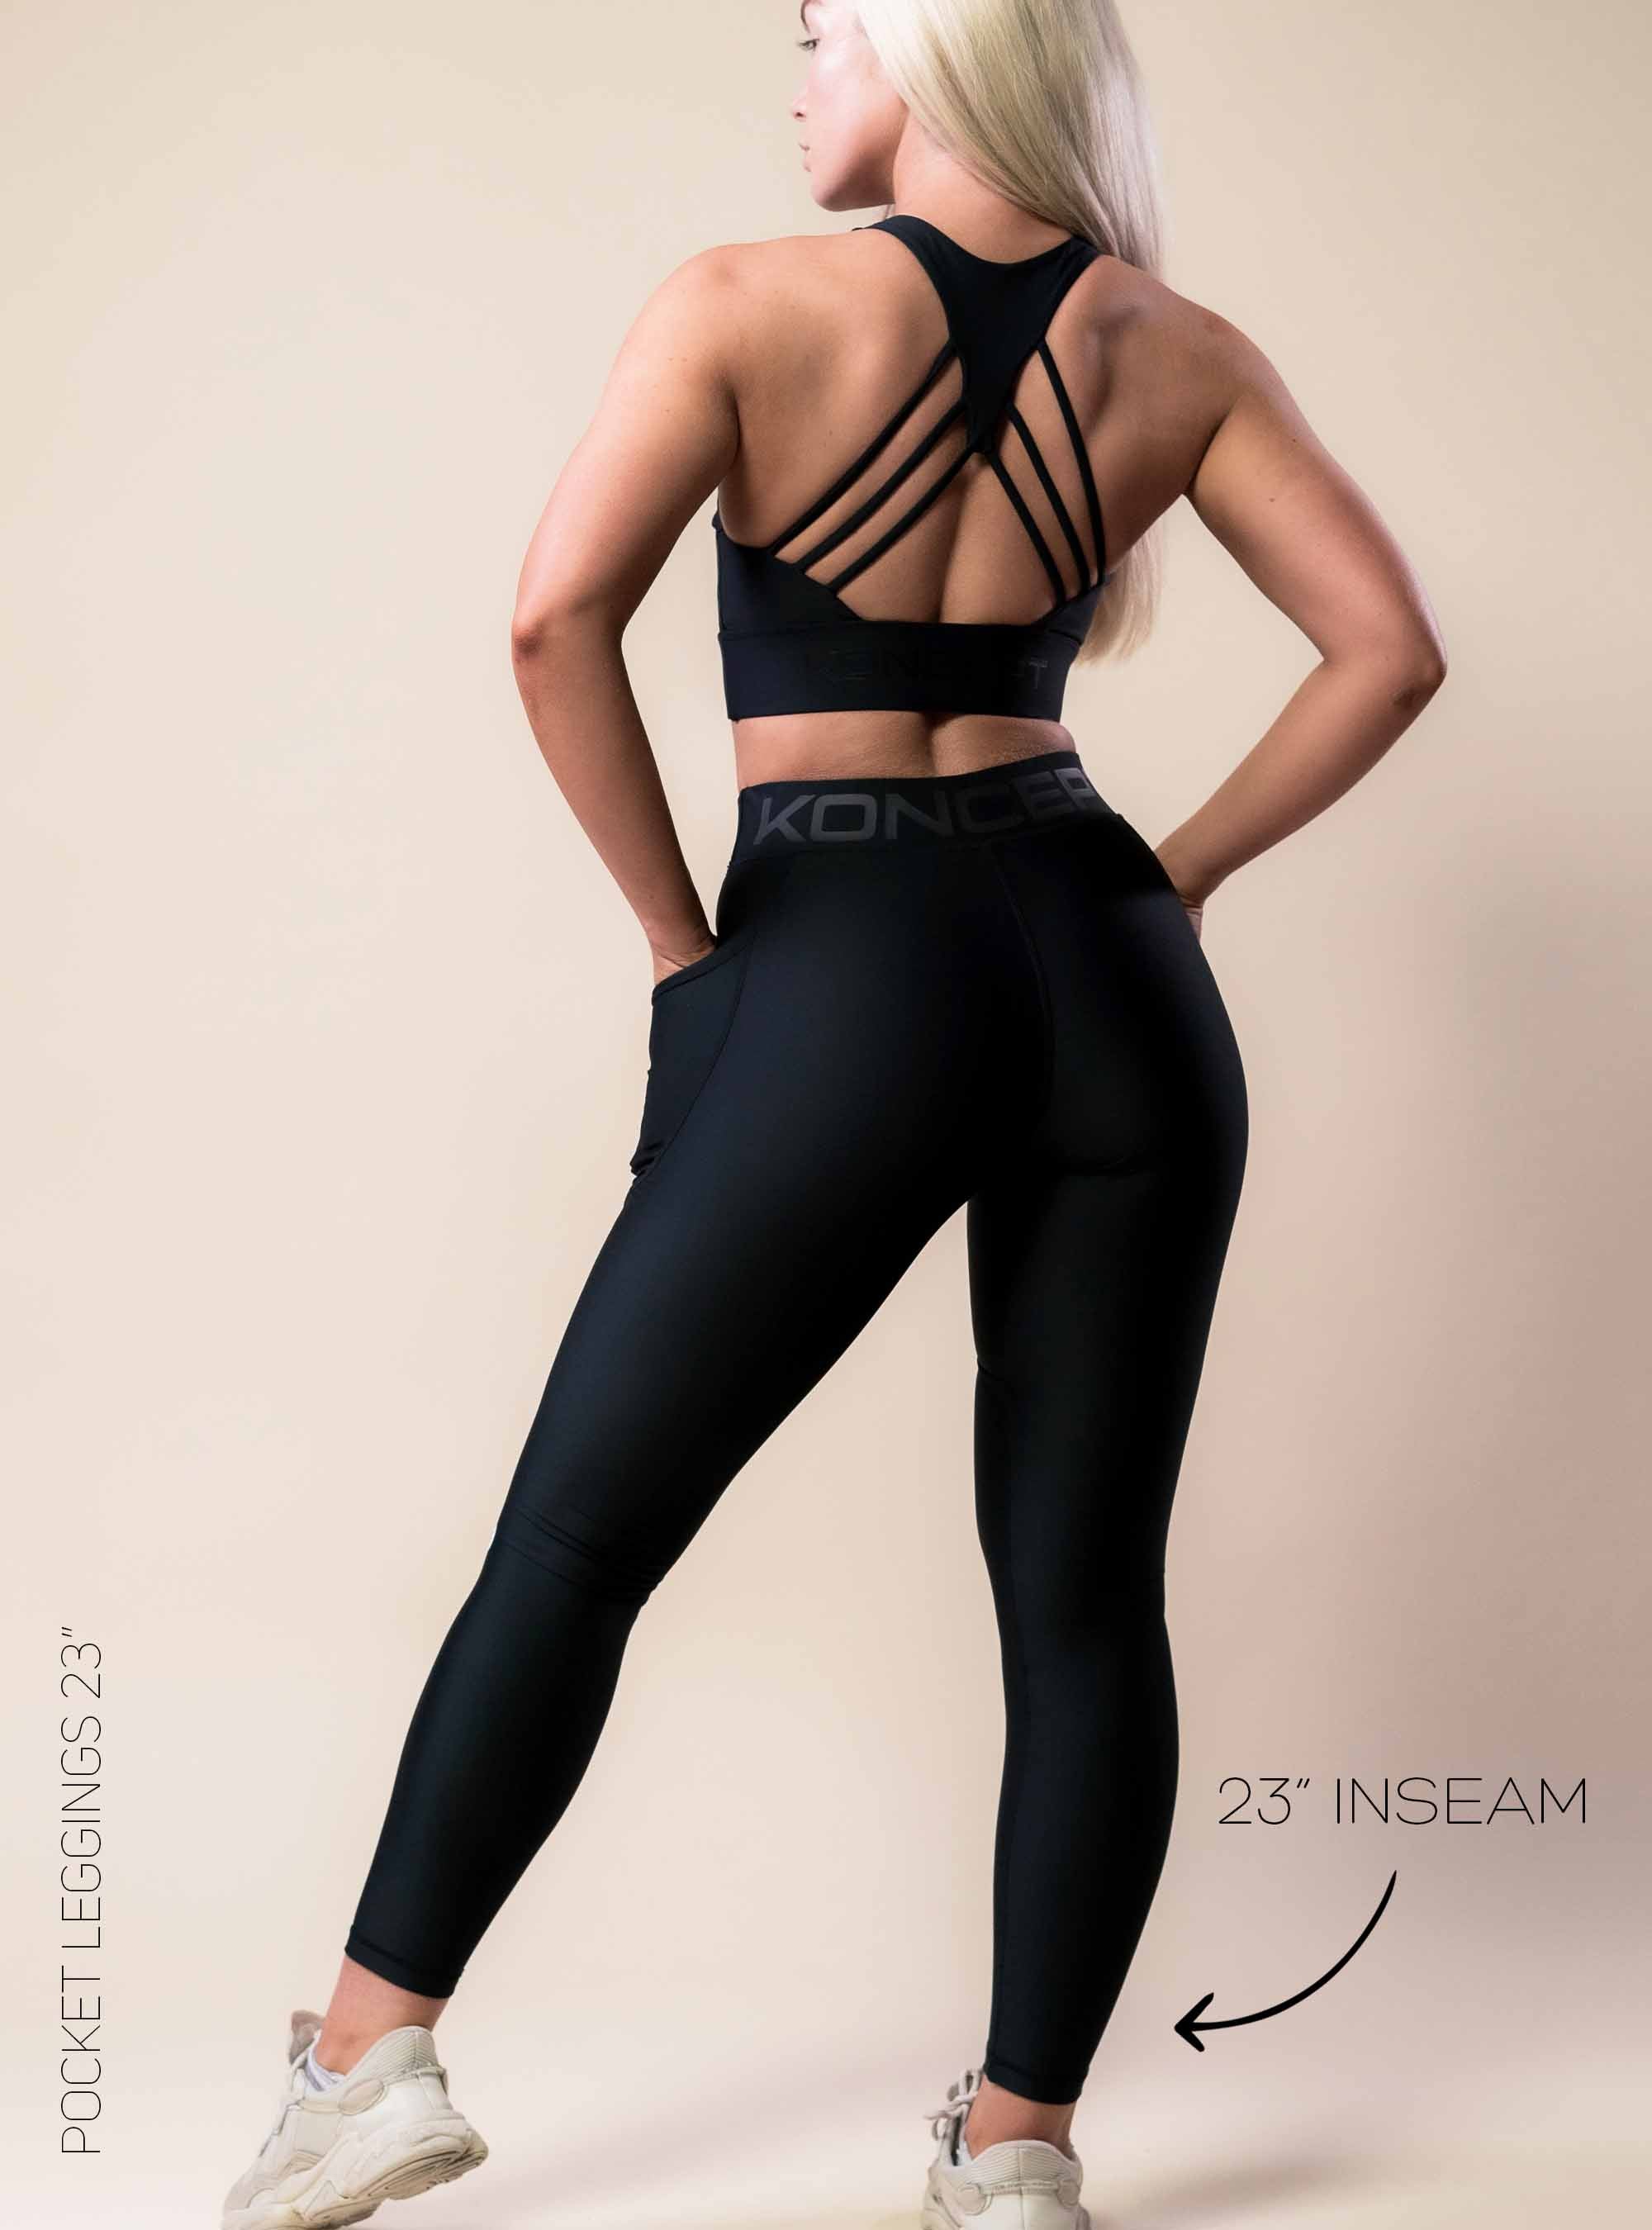 Shape, support, and slay in our soon-to-launch black shaping sports leggings  🔥🔥🔥 Available in 2 colors S-M-L-XL 🥰🥰🥰�